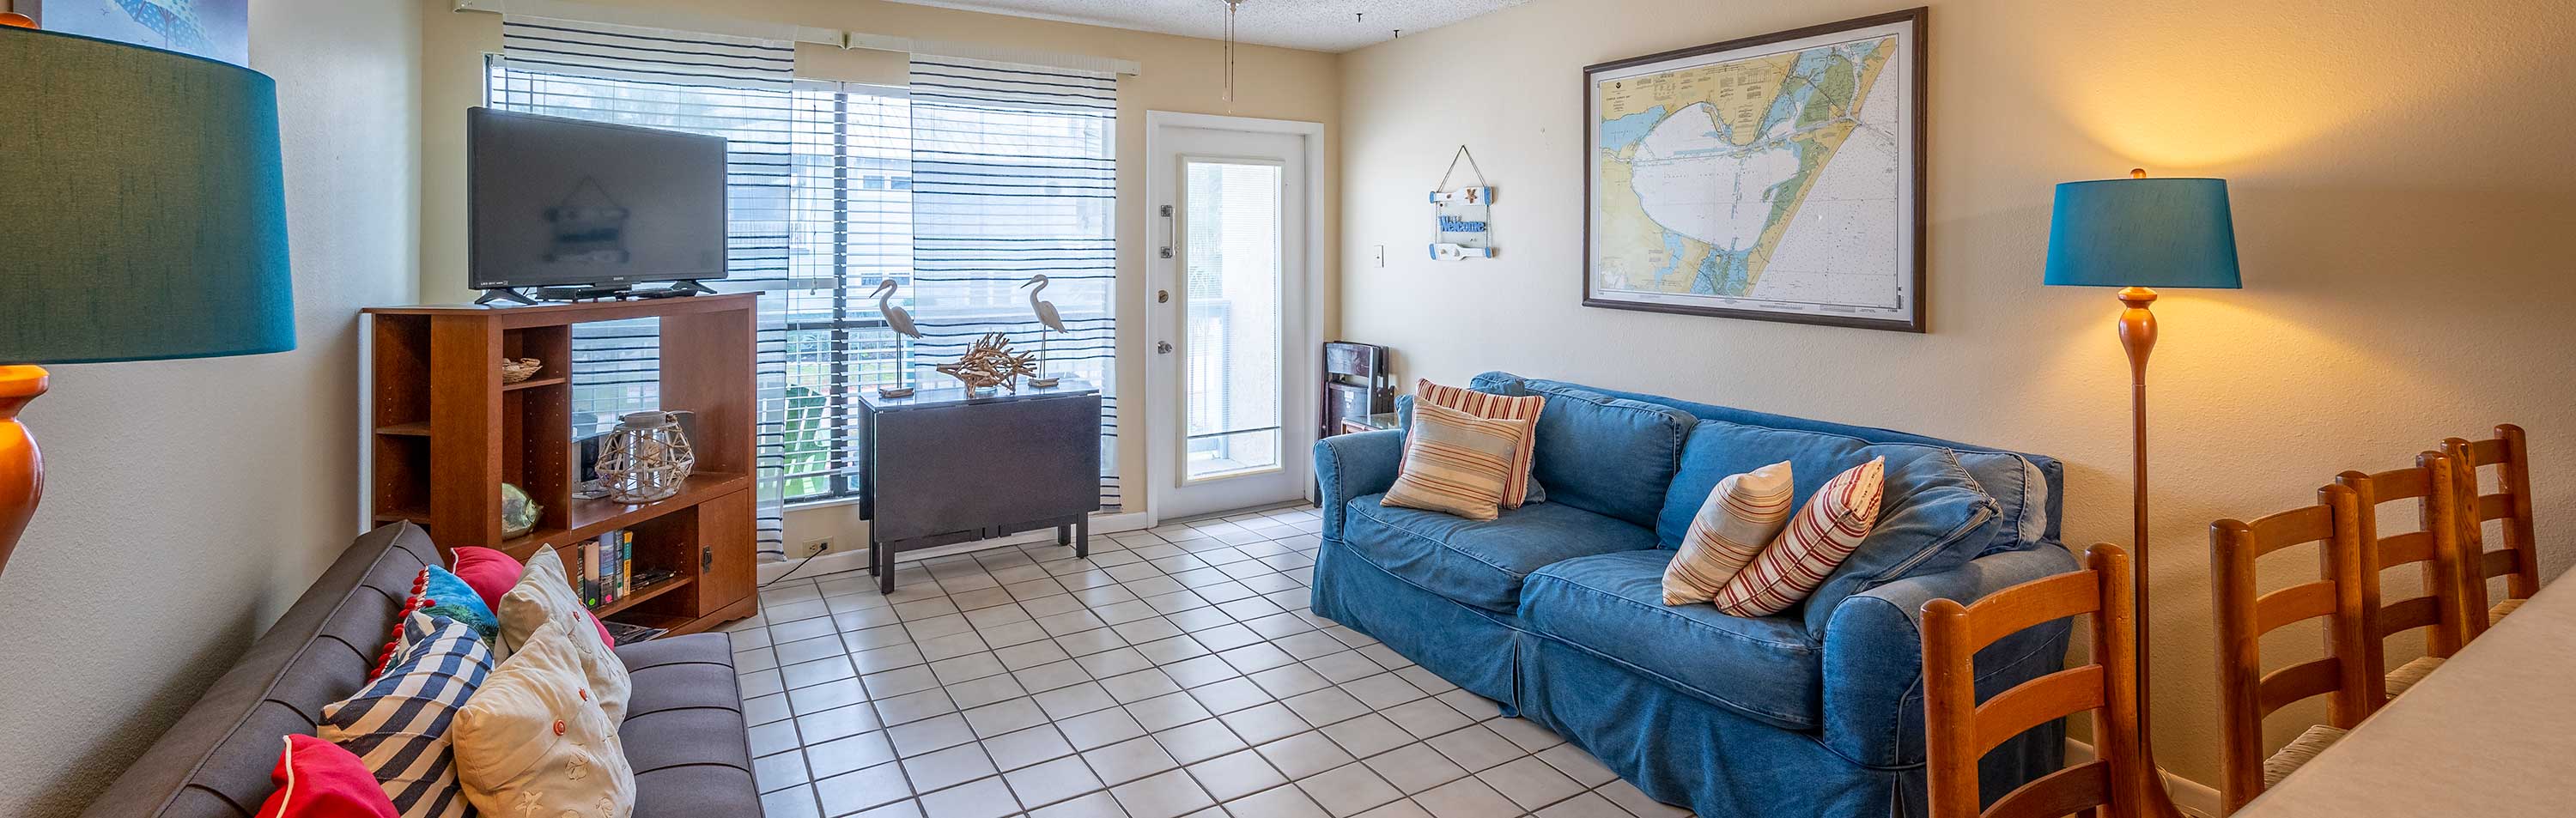 Come and stay at Tortuga Flat in Port Aransas